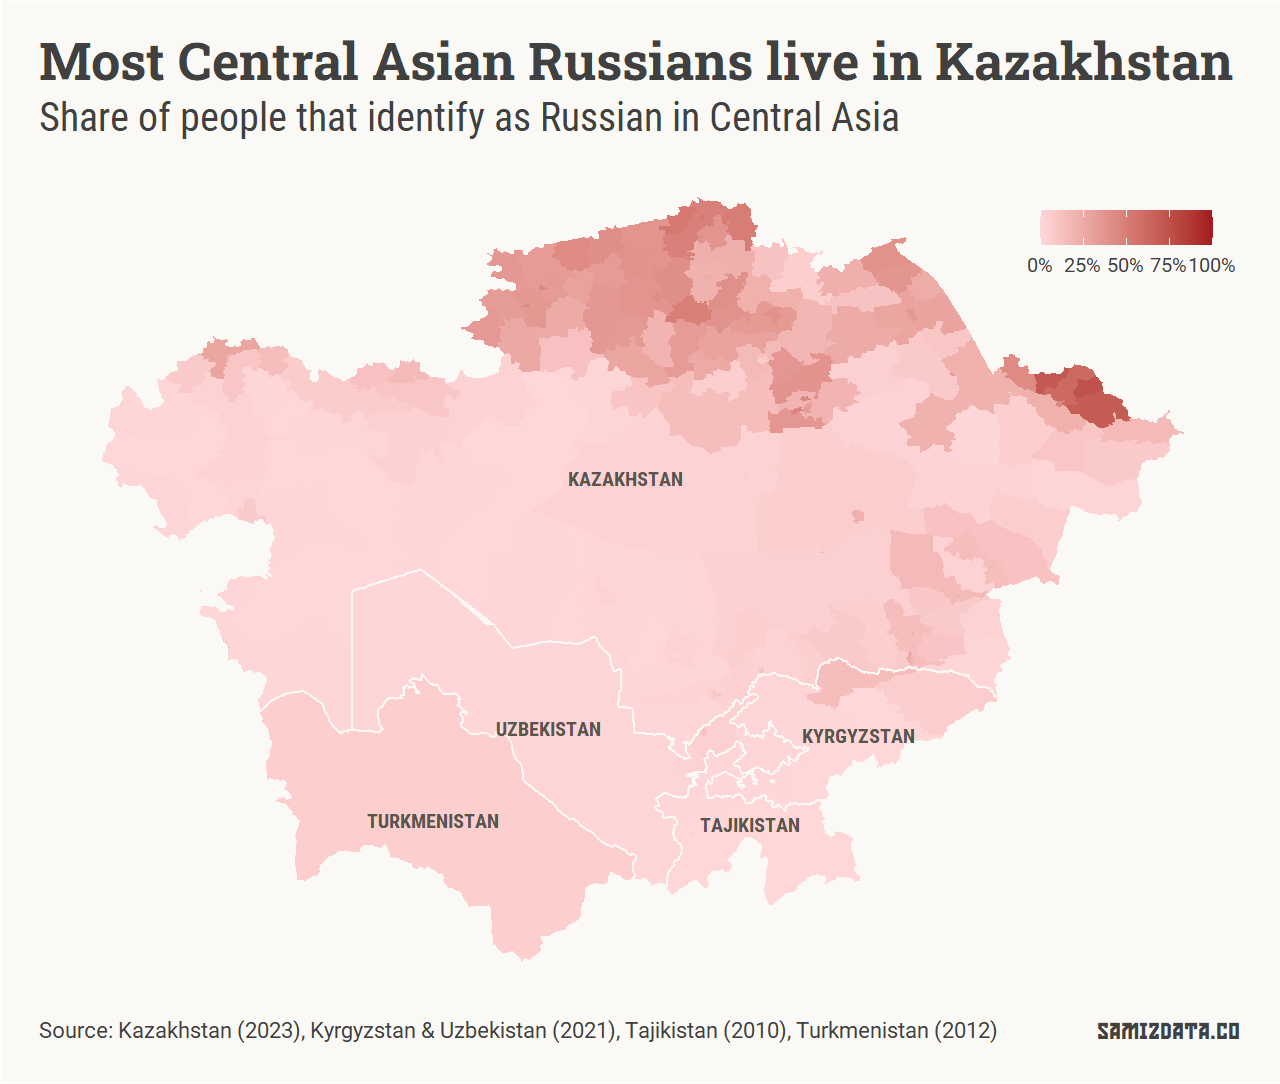 Map of Kazakhstan, Kyrgyzstan, Tajikistan, Turkmenistan and Uzbekistan, showing the share of Russians in each one of their regions according to the latest censuses.